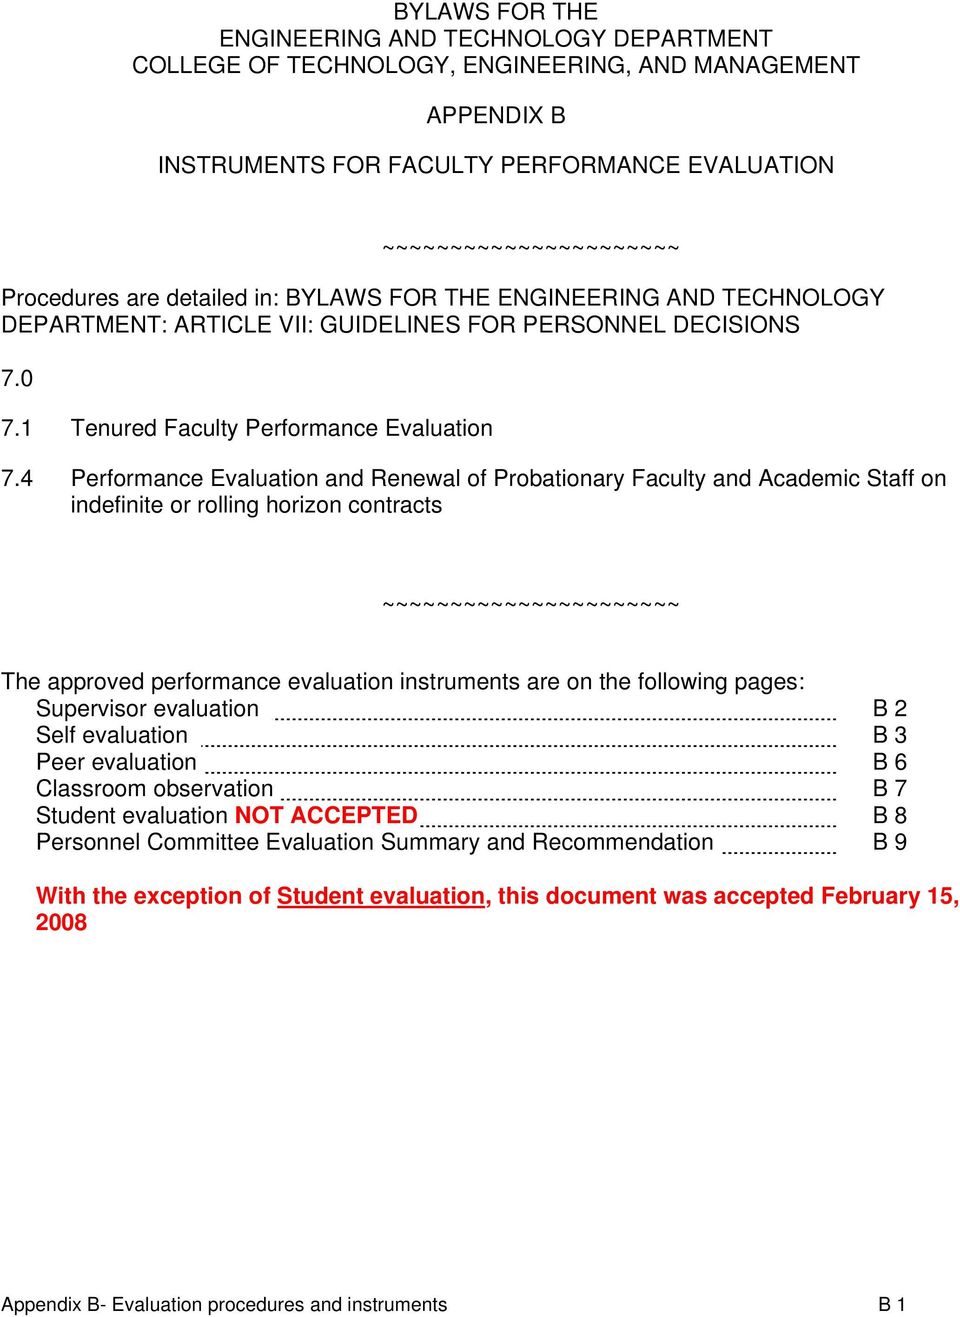 4 Performance Evaluation and Renewal of Probationary Faculty and Academic Staff on indefinite or rolling horizon contracts ~~~~~~~~~~~~~~~~~~~~~~ The approved performance evaluation instruments are